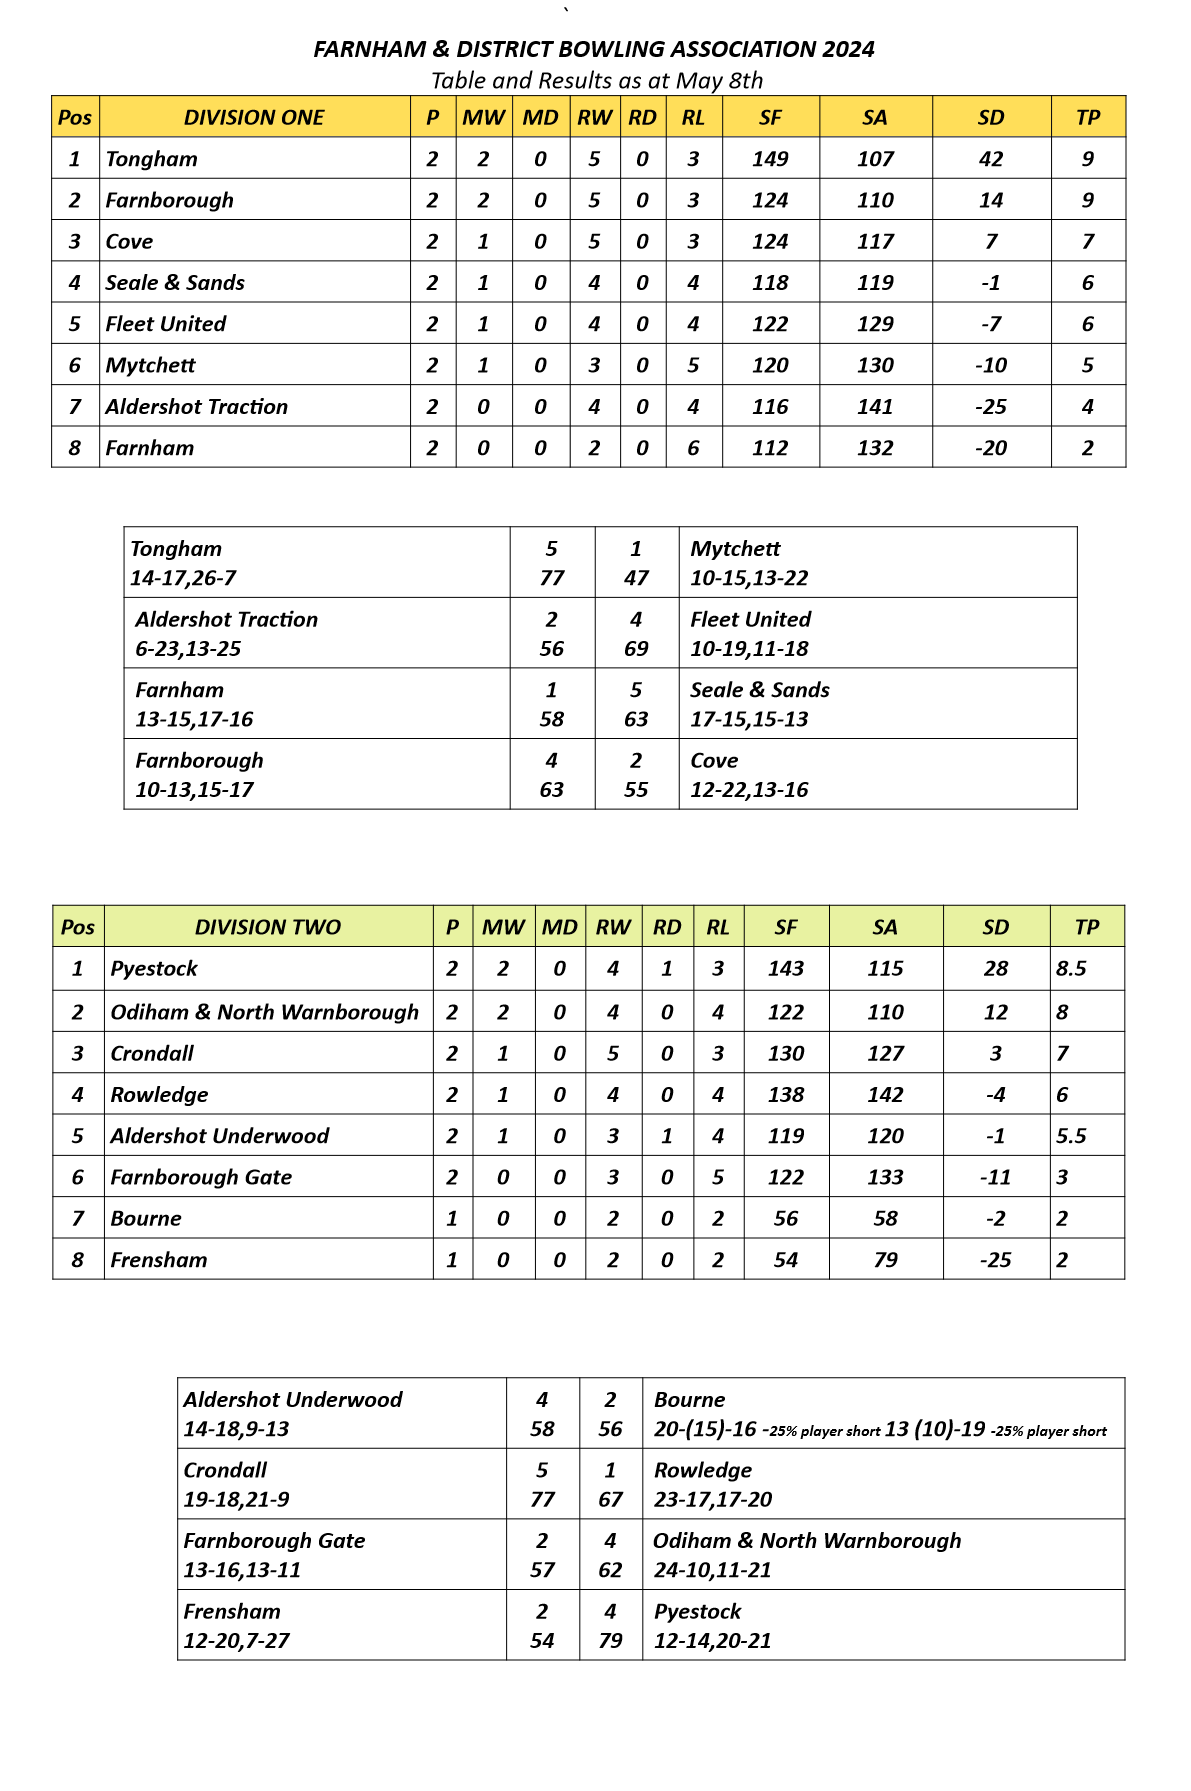  Farnham&District Bowling Association  Tables & Results as at May 8th